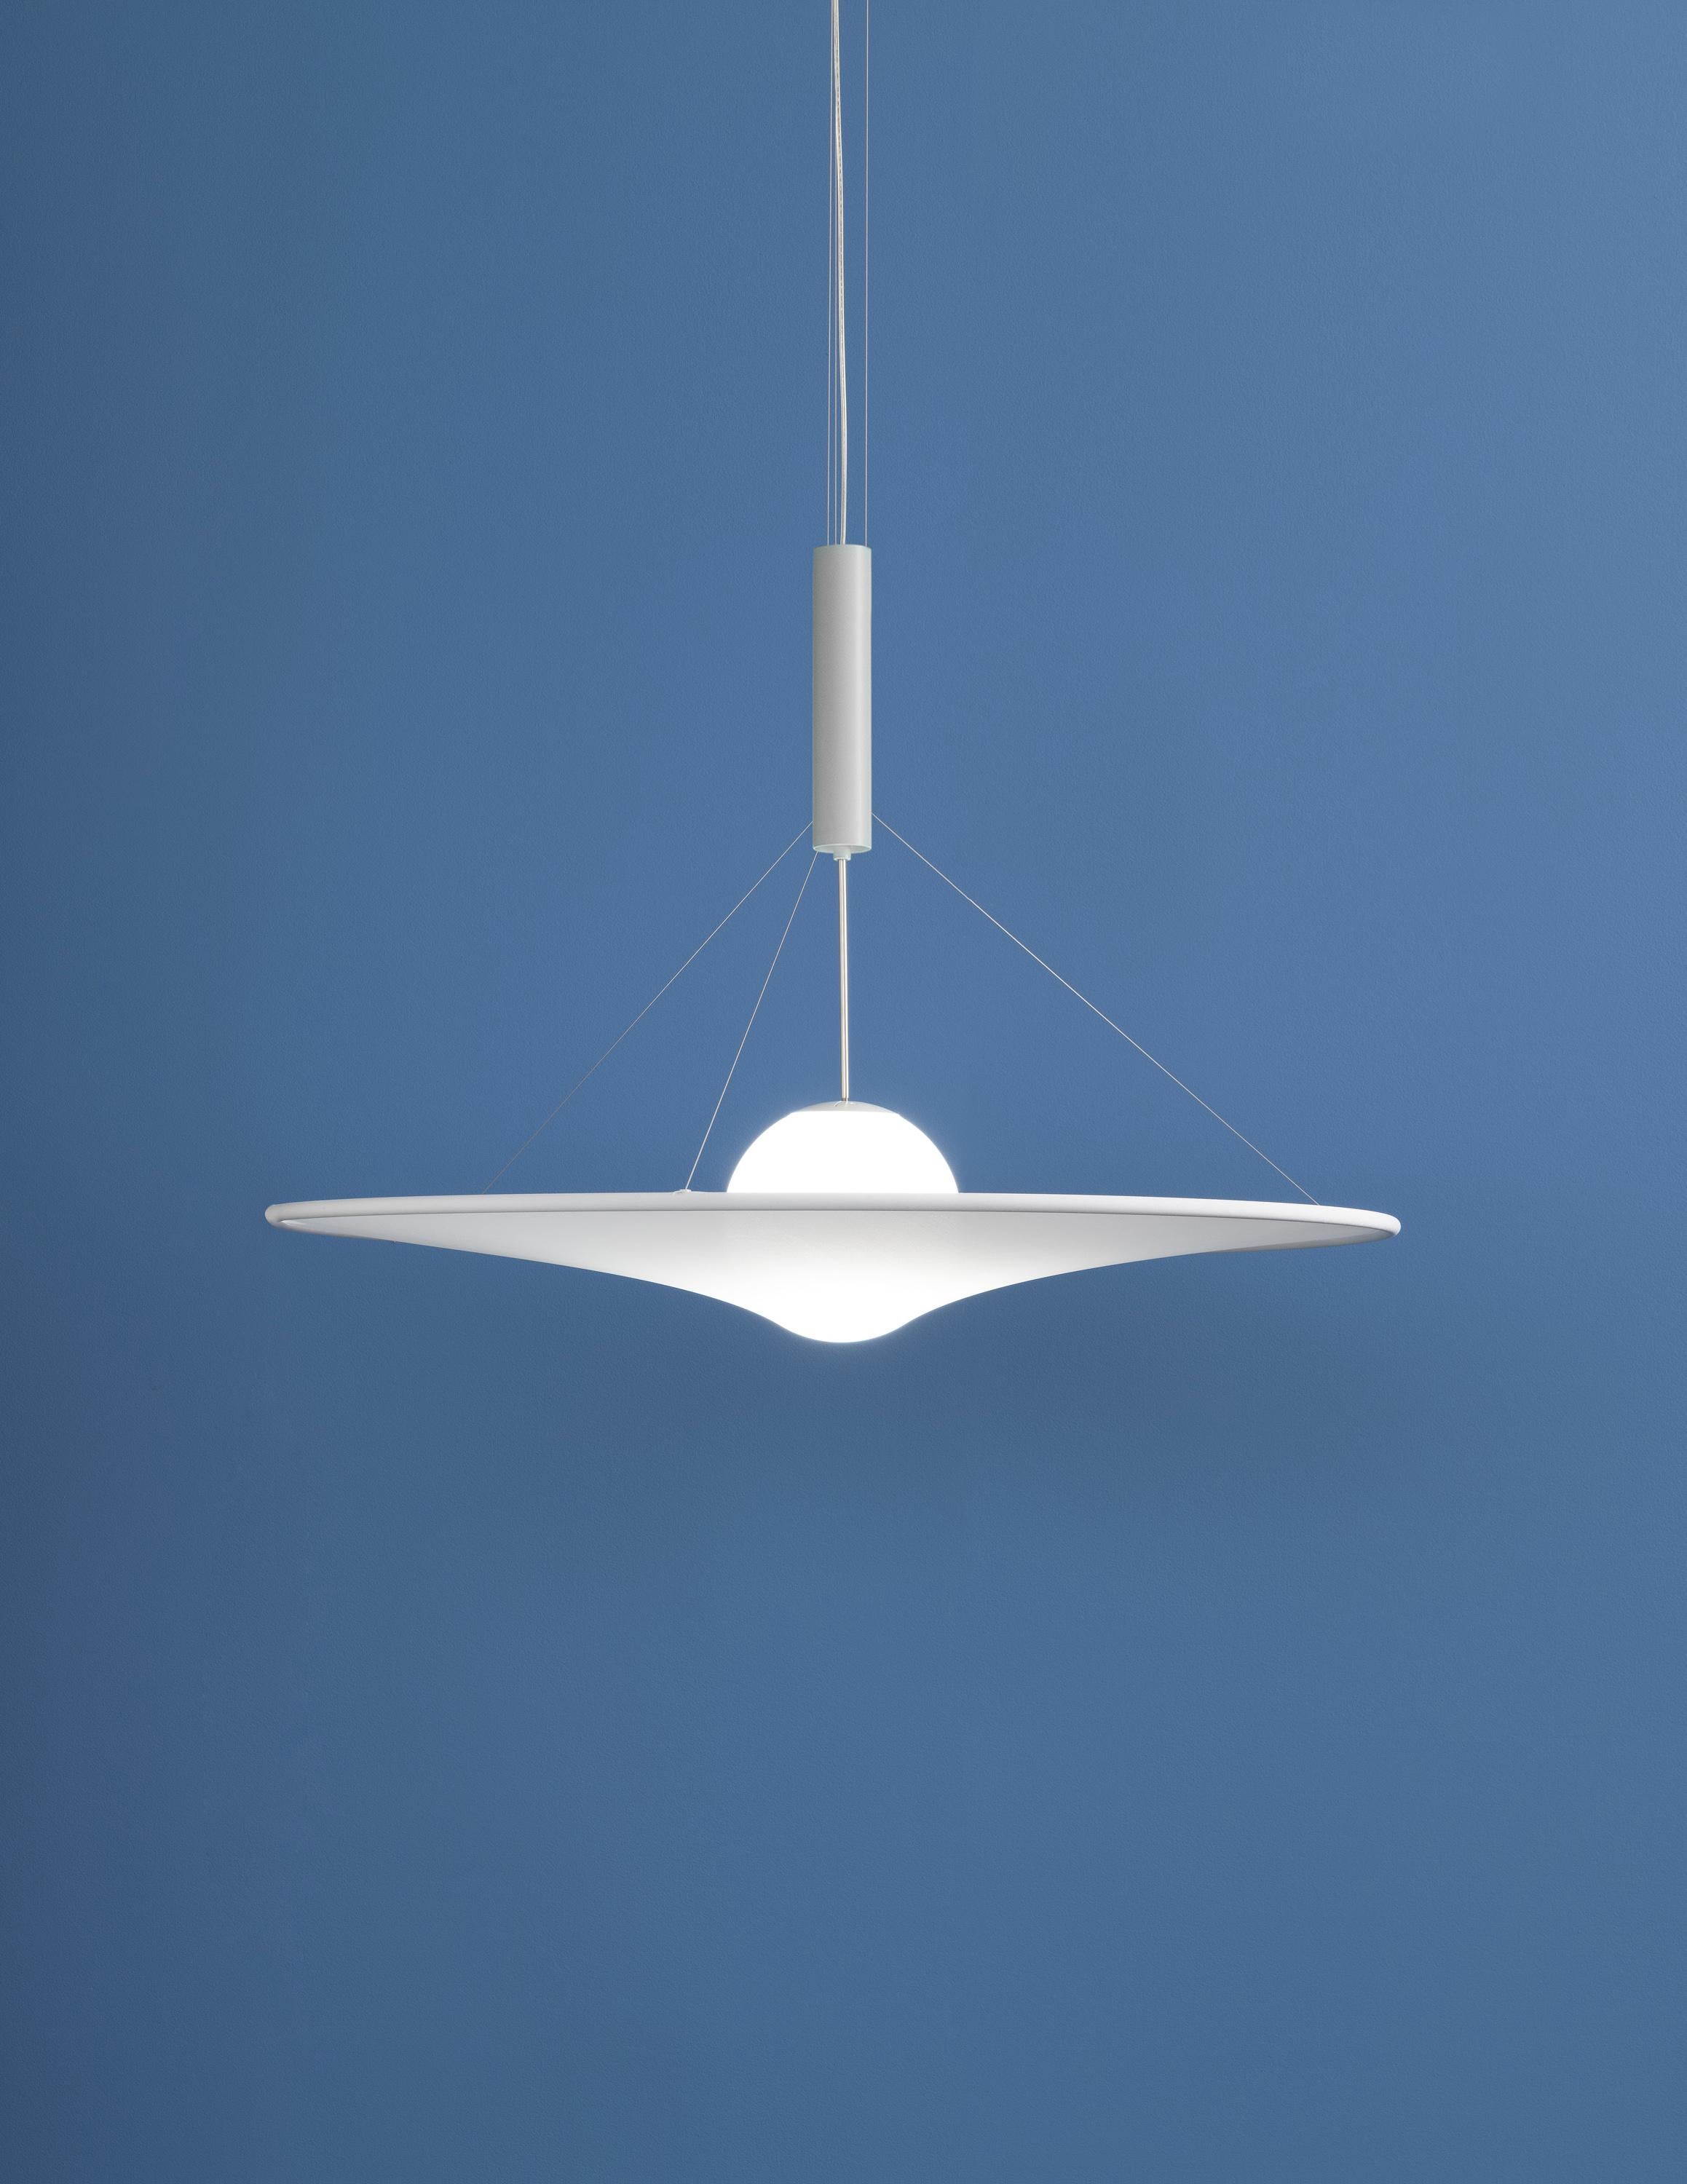 Axolight Manto Medium Pendant Light in White Fabric and Grey Finish by Davide Besozzi

Manto expresses its true personality in the reciprocal movement of simple geometries. Thanks to its artisan knowledge and dynamic nature, it changes shape and